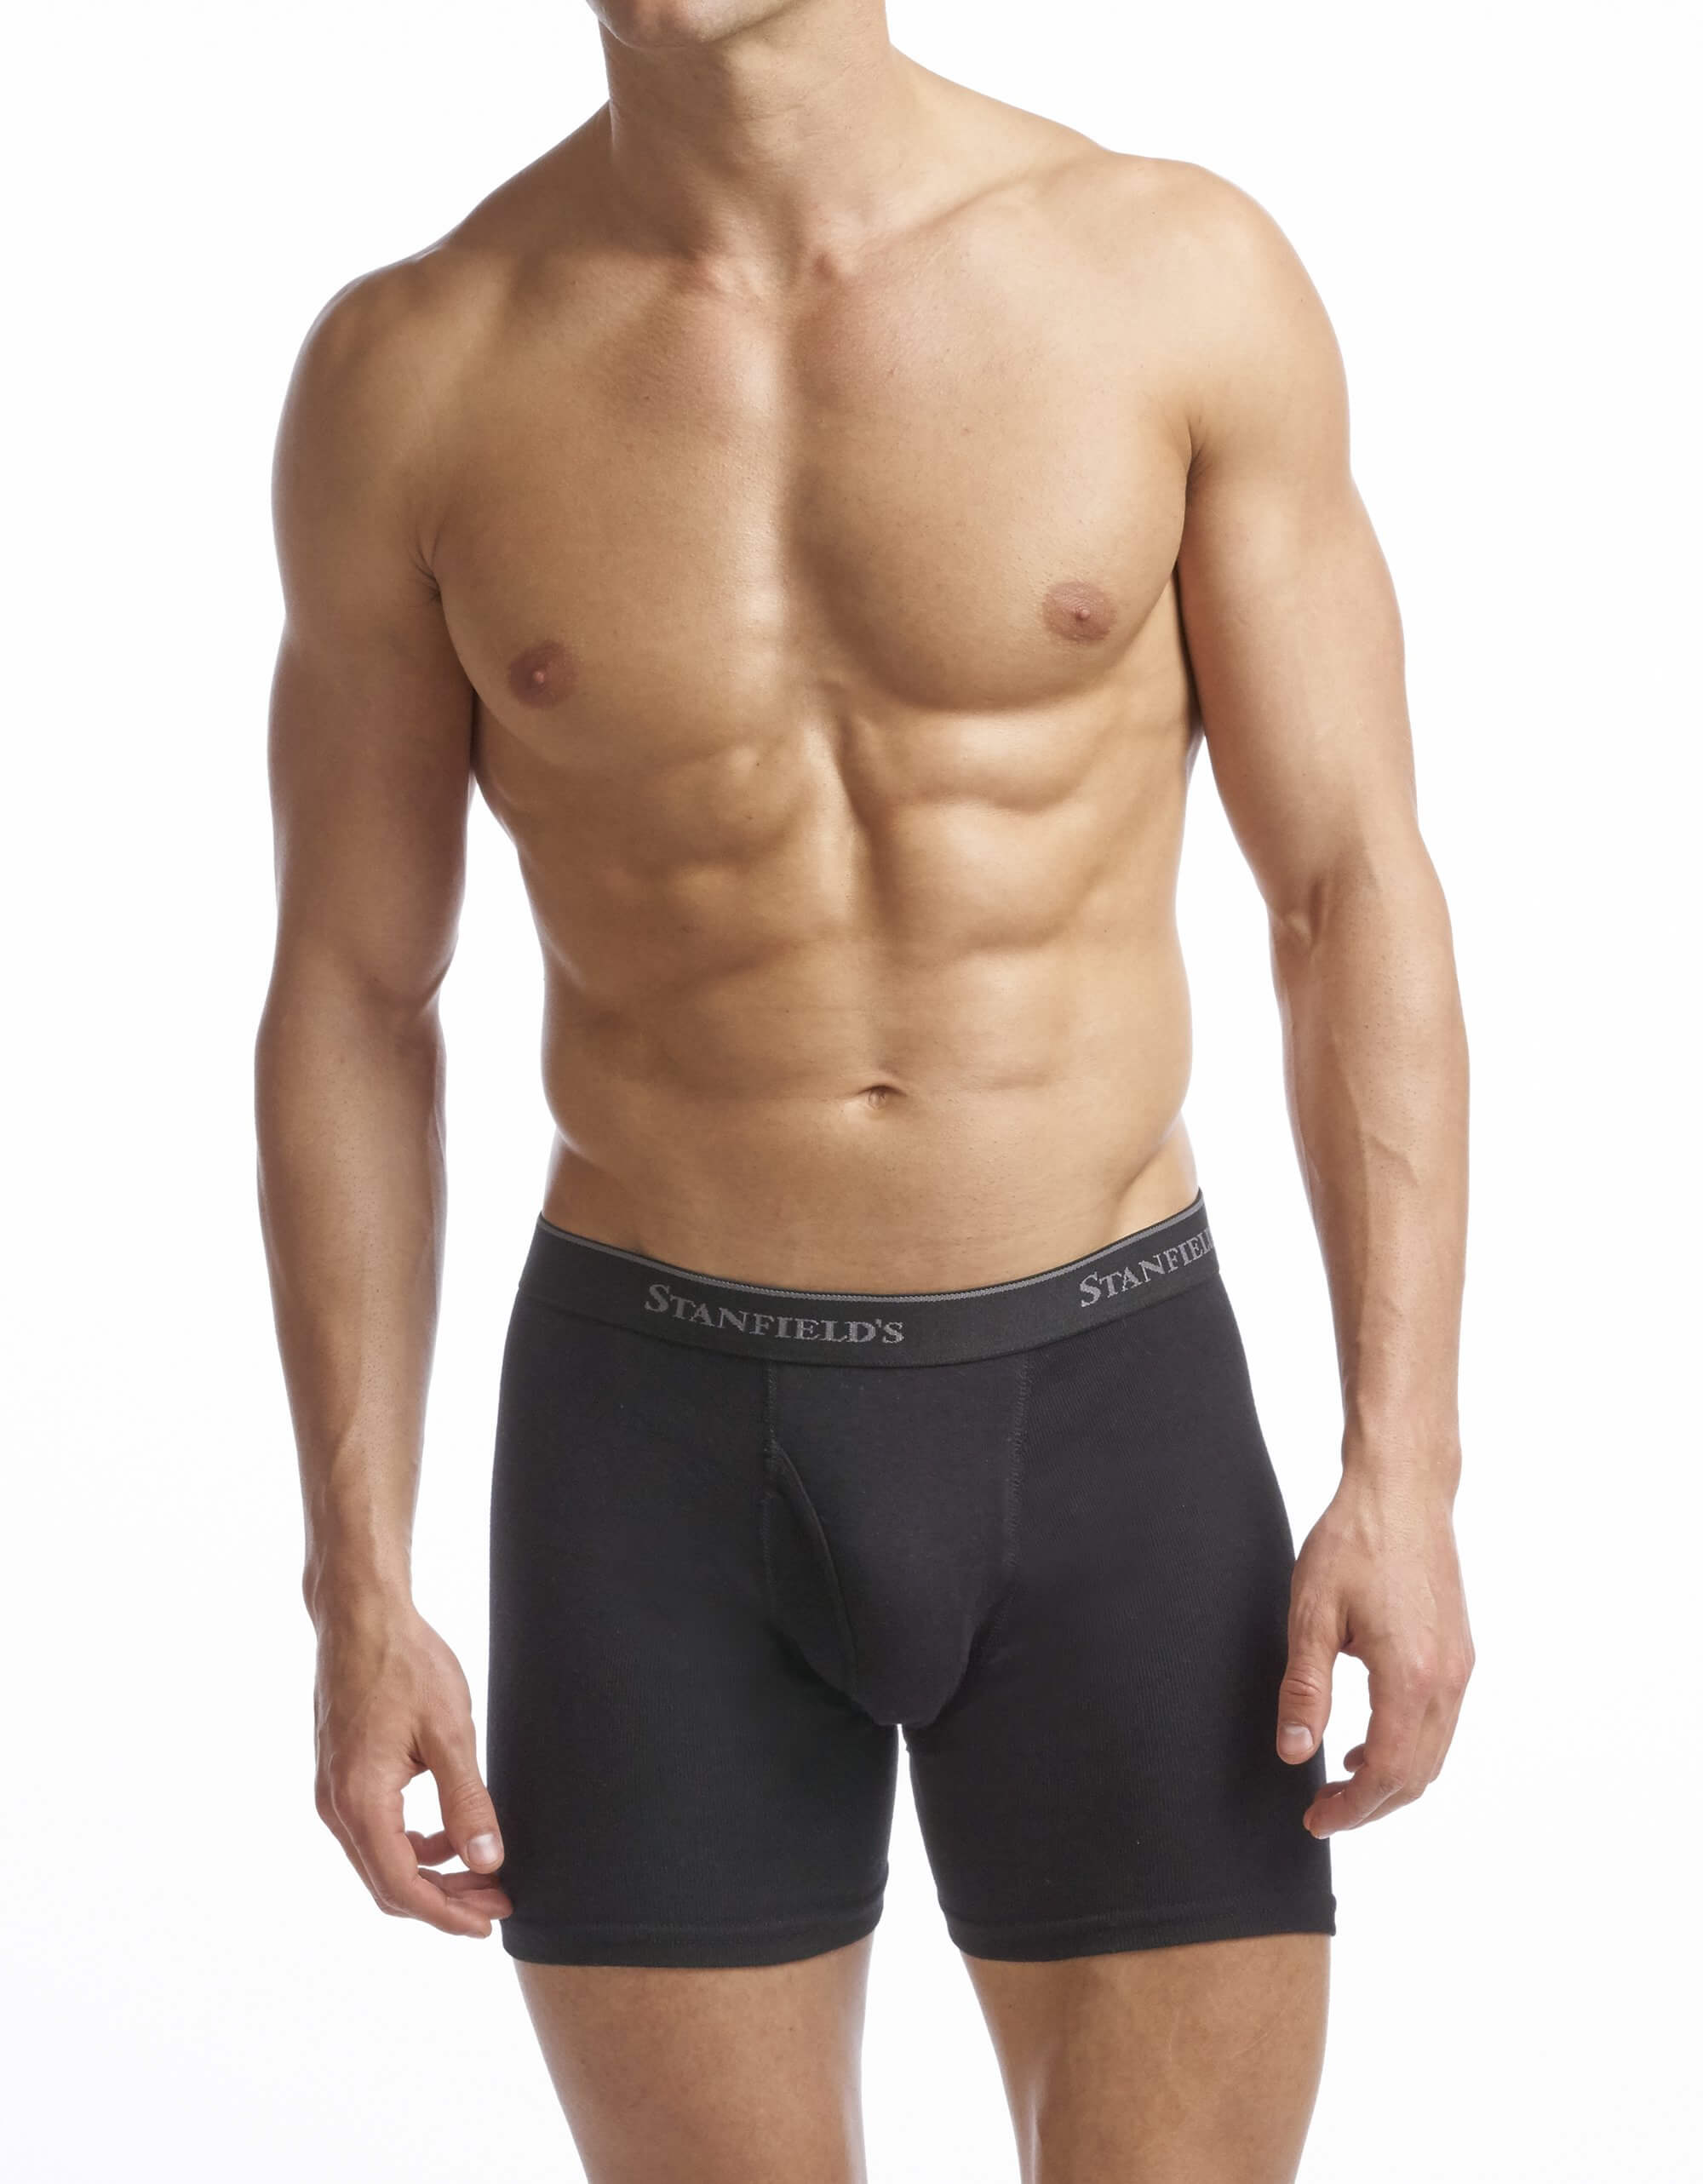 AIR now available at Peavey Mart!, Now available at Peavey Mart, the most  comfortable and lightest underwear you'll ever own  Stanfield's AIR!  Made from a lightweight, 4-way stretch